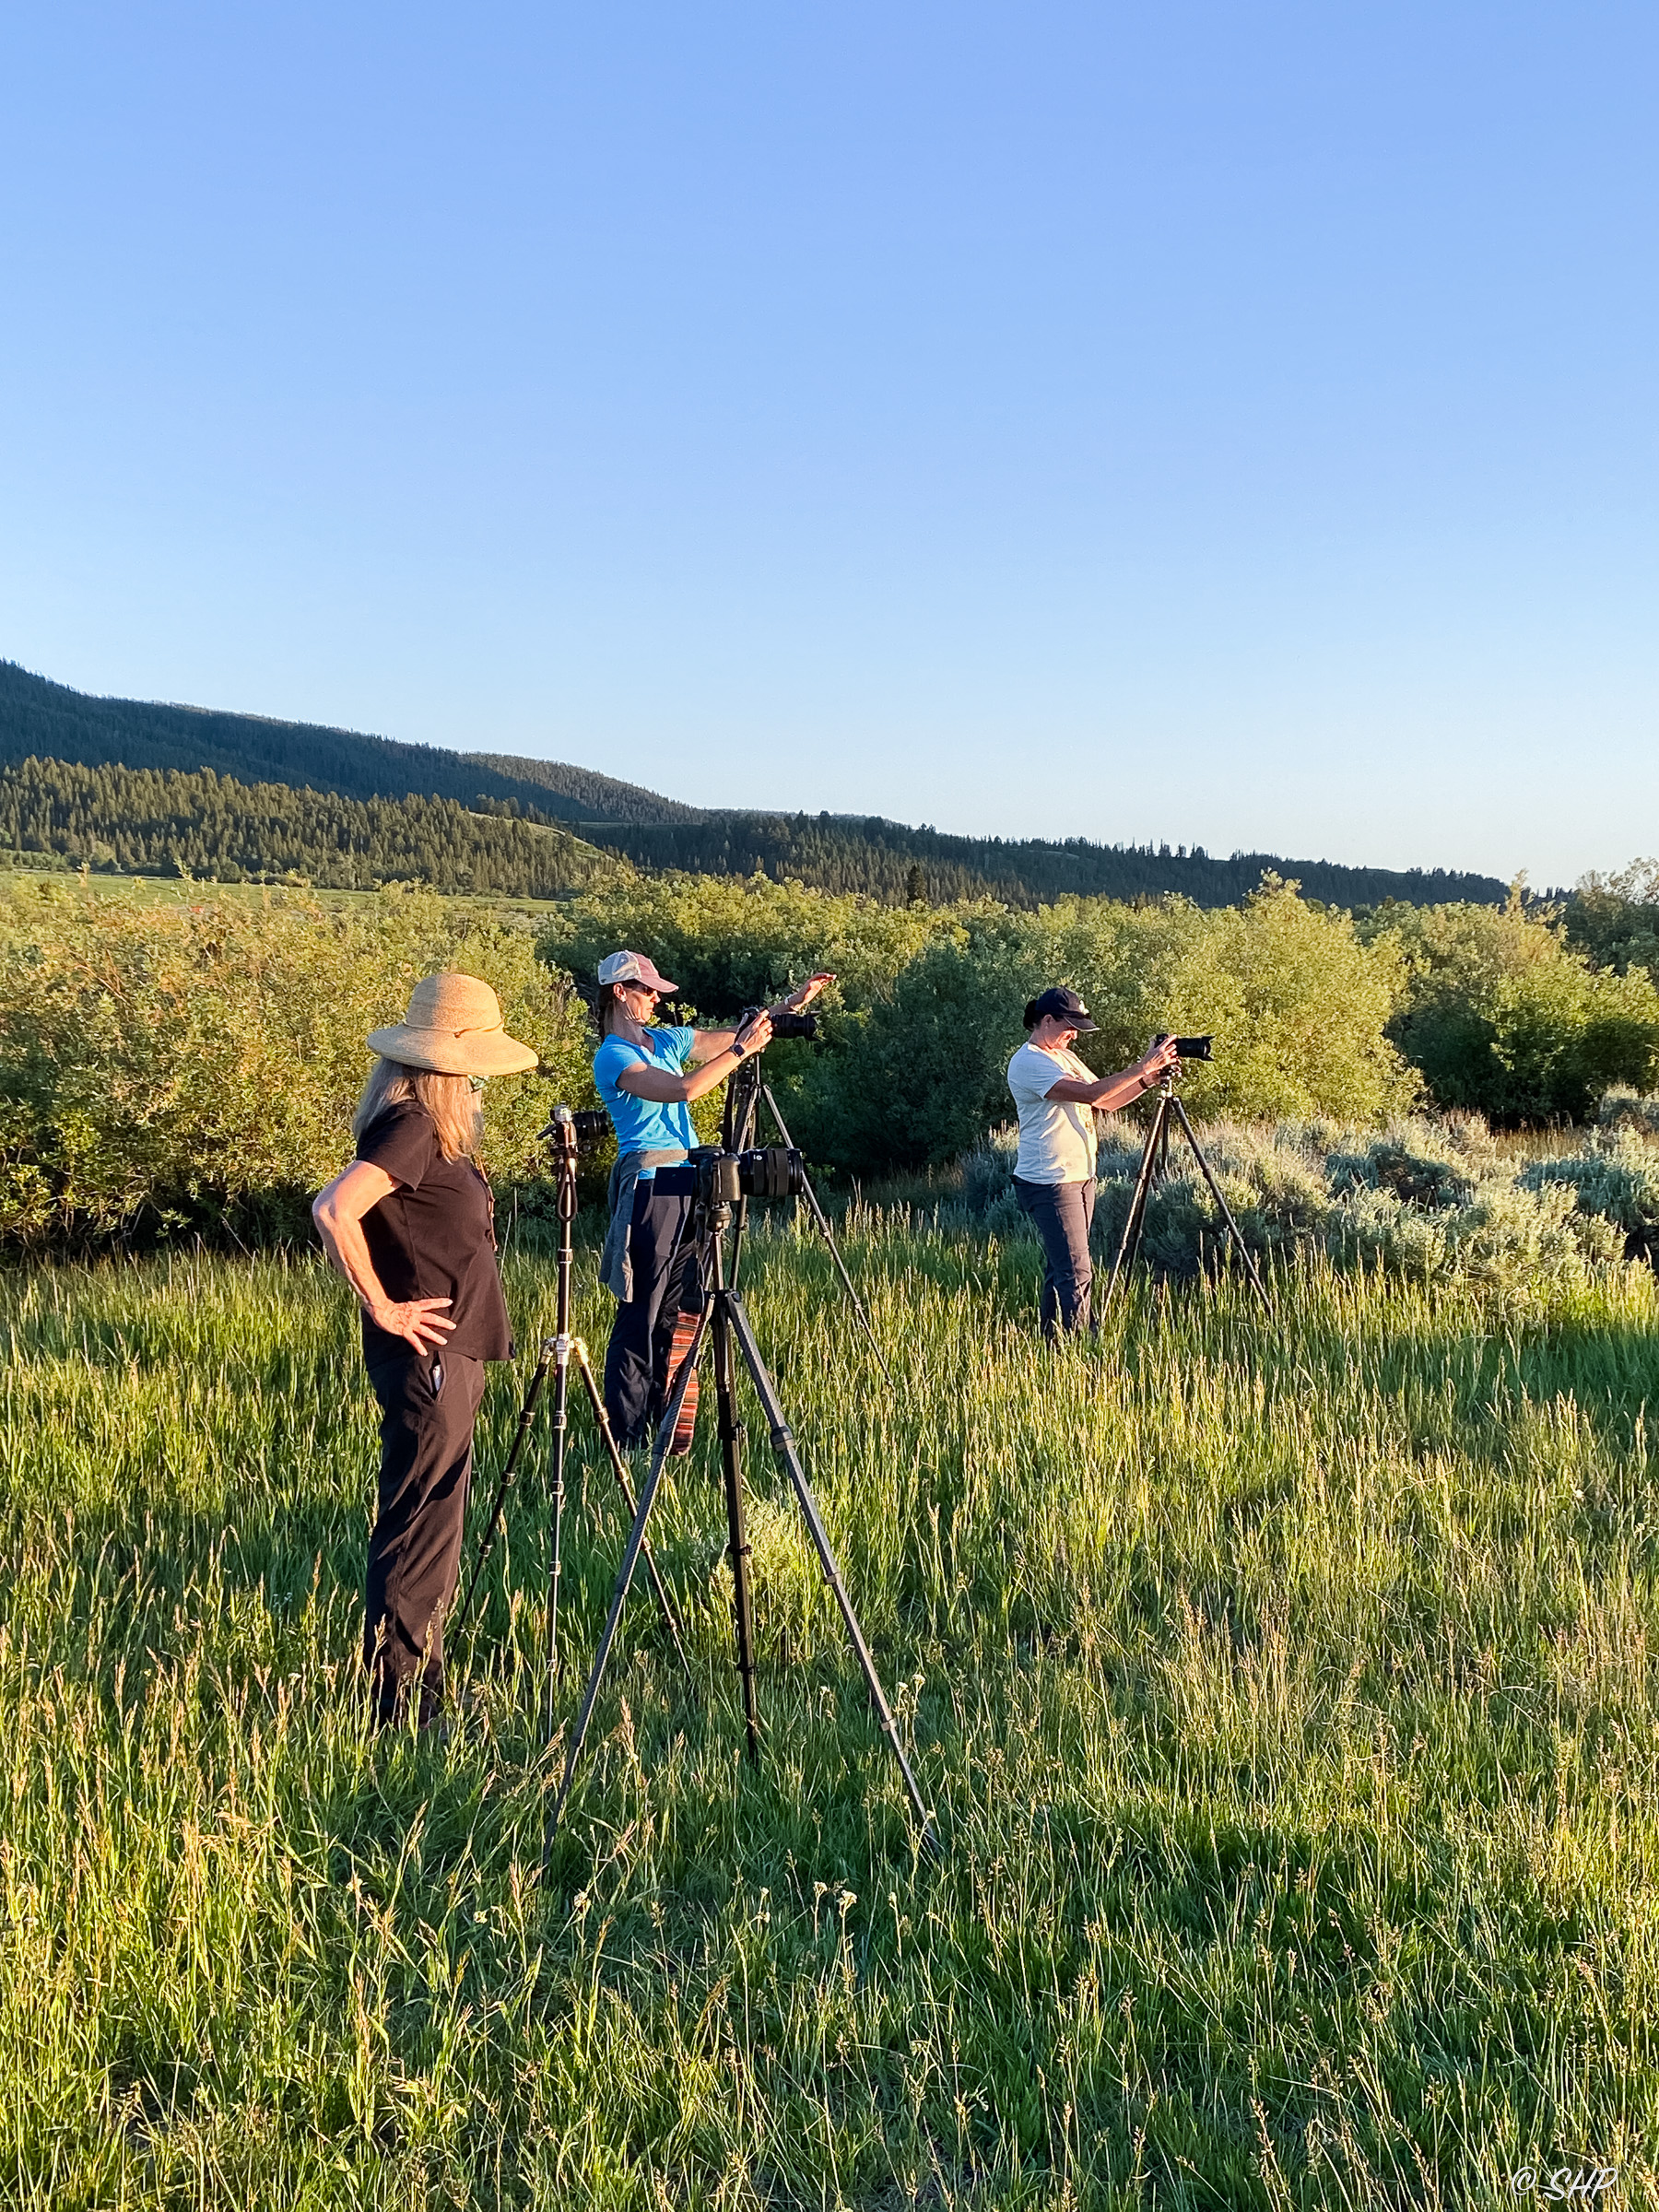 women photographers composing images in Grand Teton National Park